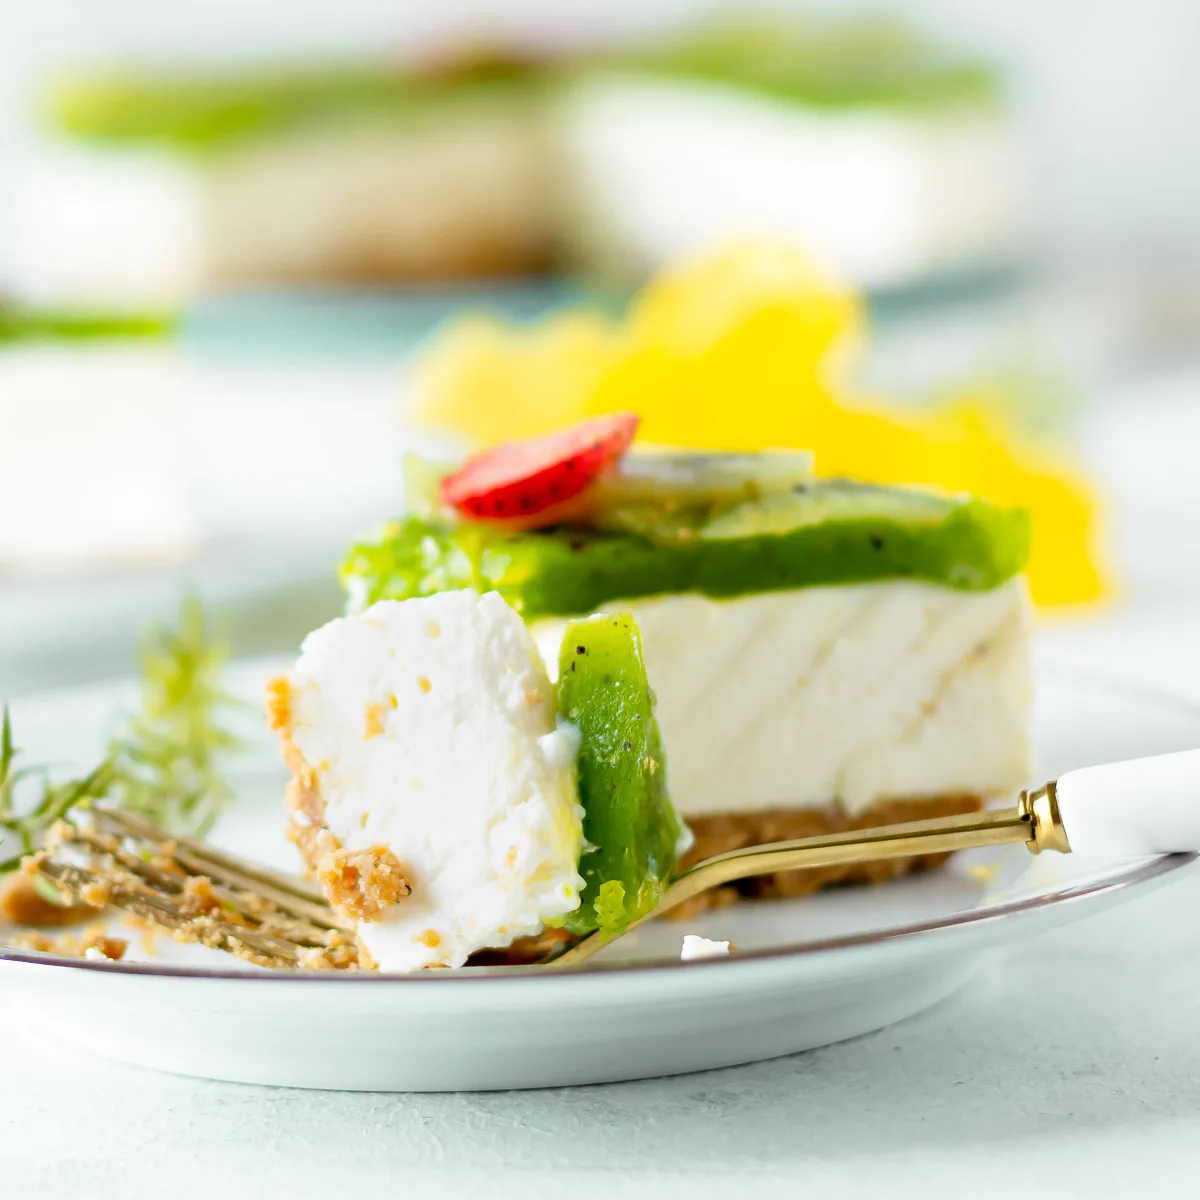 Piece of kiwi jelly cheesecake on a fork.